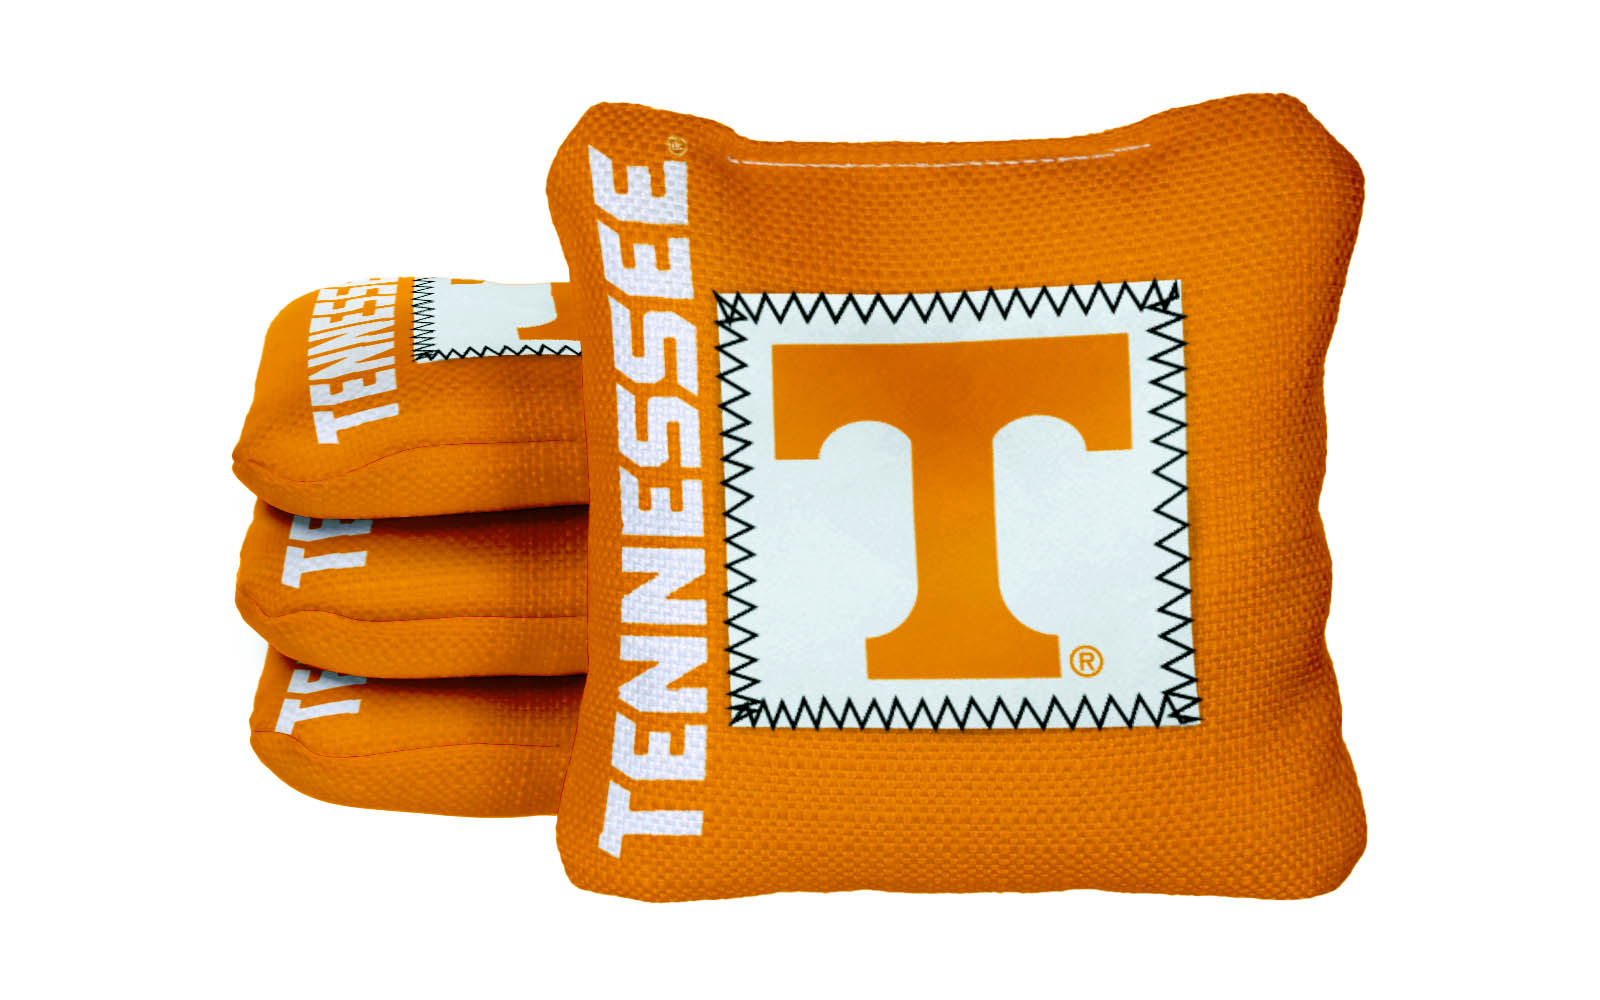 Officially Licensed Collegiate Cornhole Bags - Gamechanger Steady 2.0 - Set of 4 - University of Tennessee